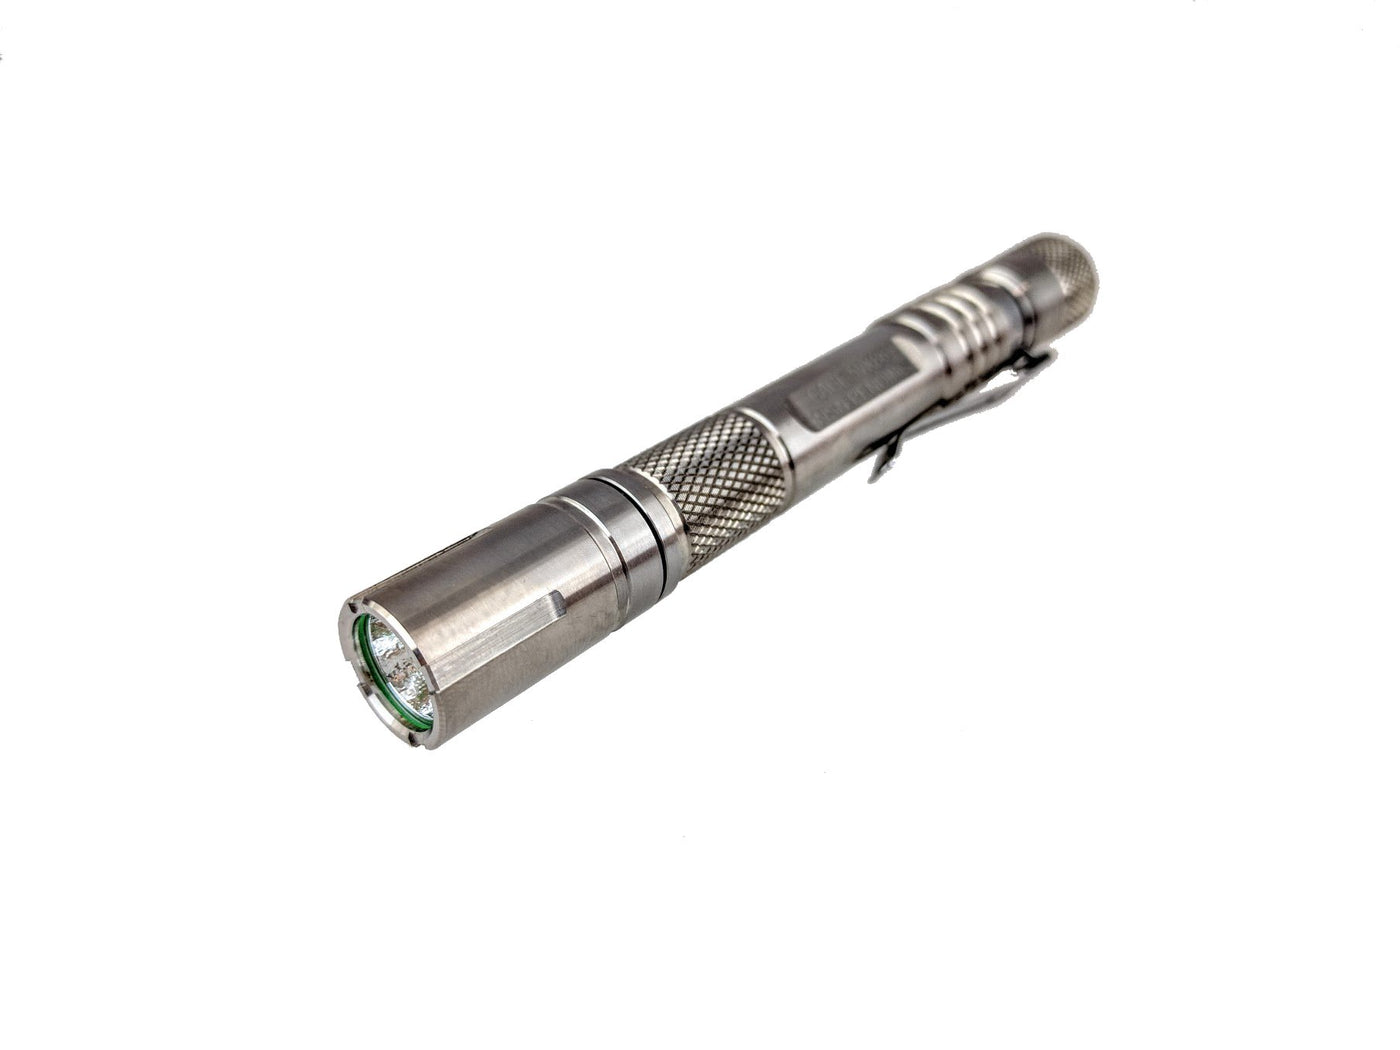 Titanium - Inspection : AAAx2 Extreme - Tactical Light by Maratac Rev 2 - CountyComm